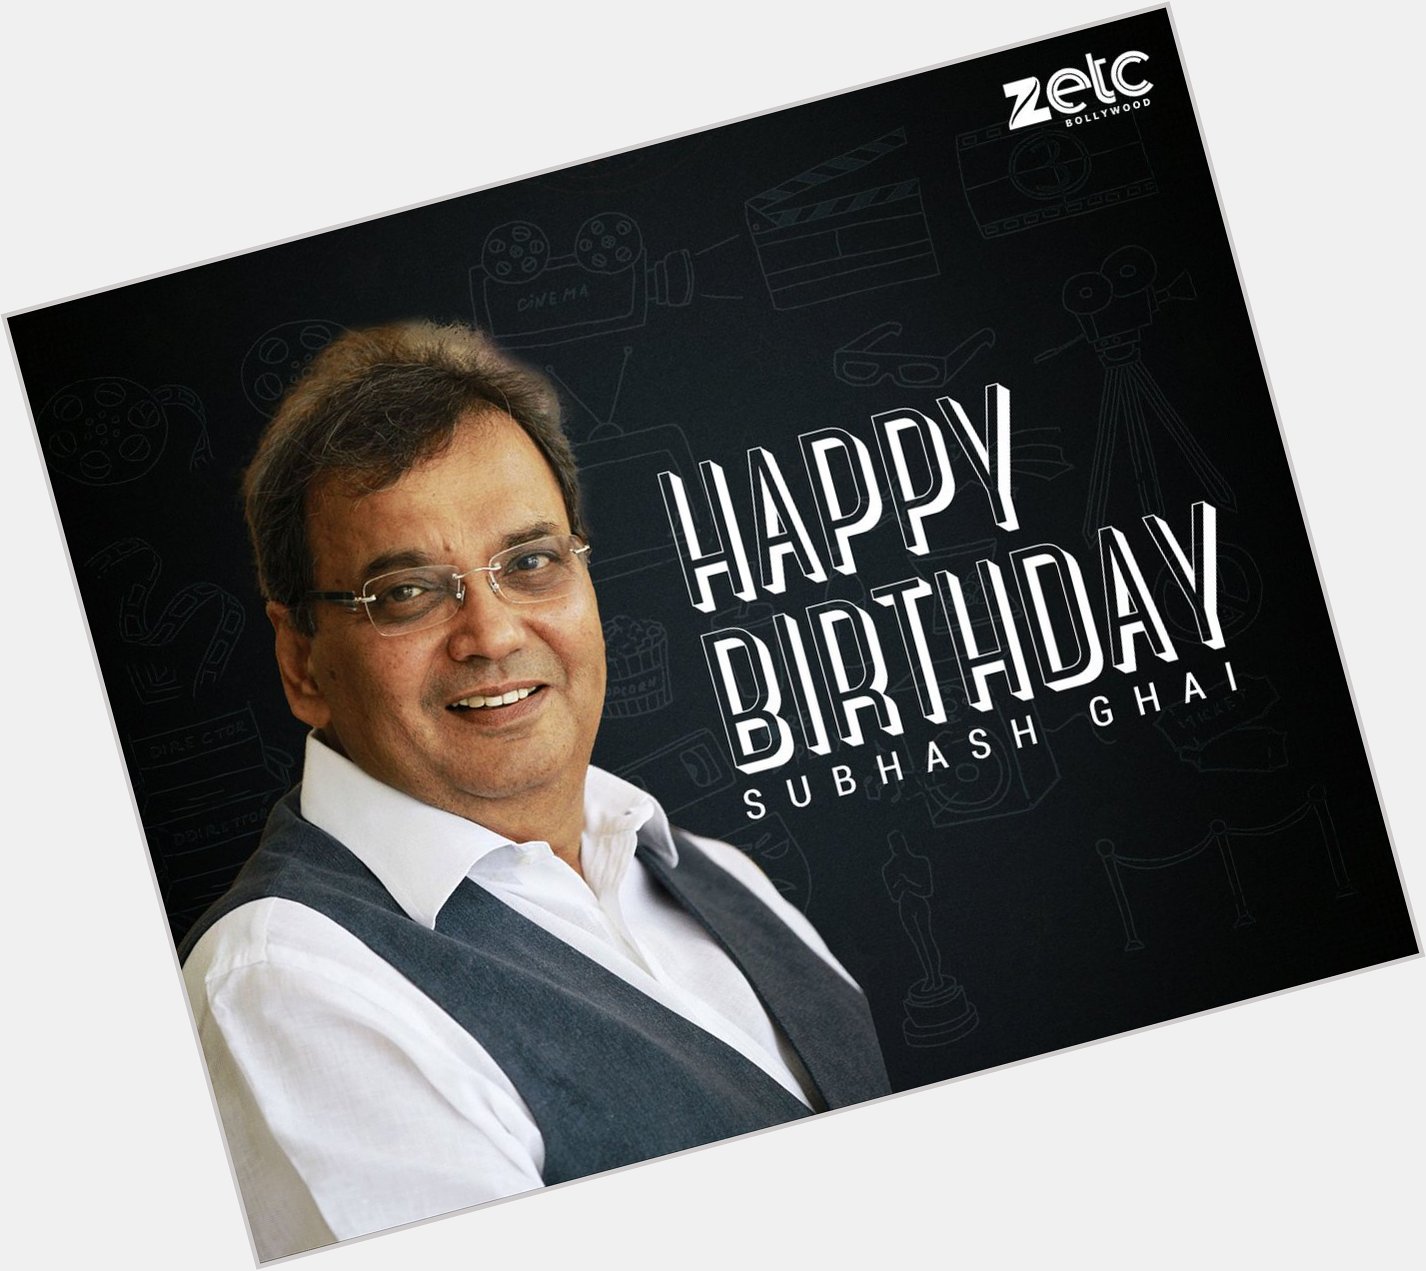 A legend who has given us many memorable movies. Happy Birthday Subhash Ghai. 